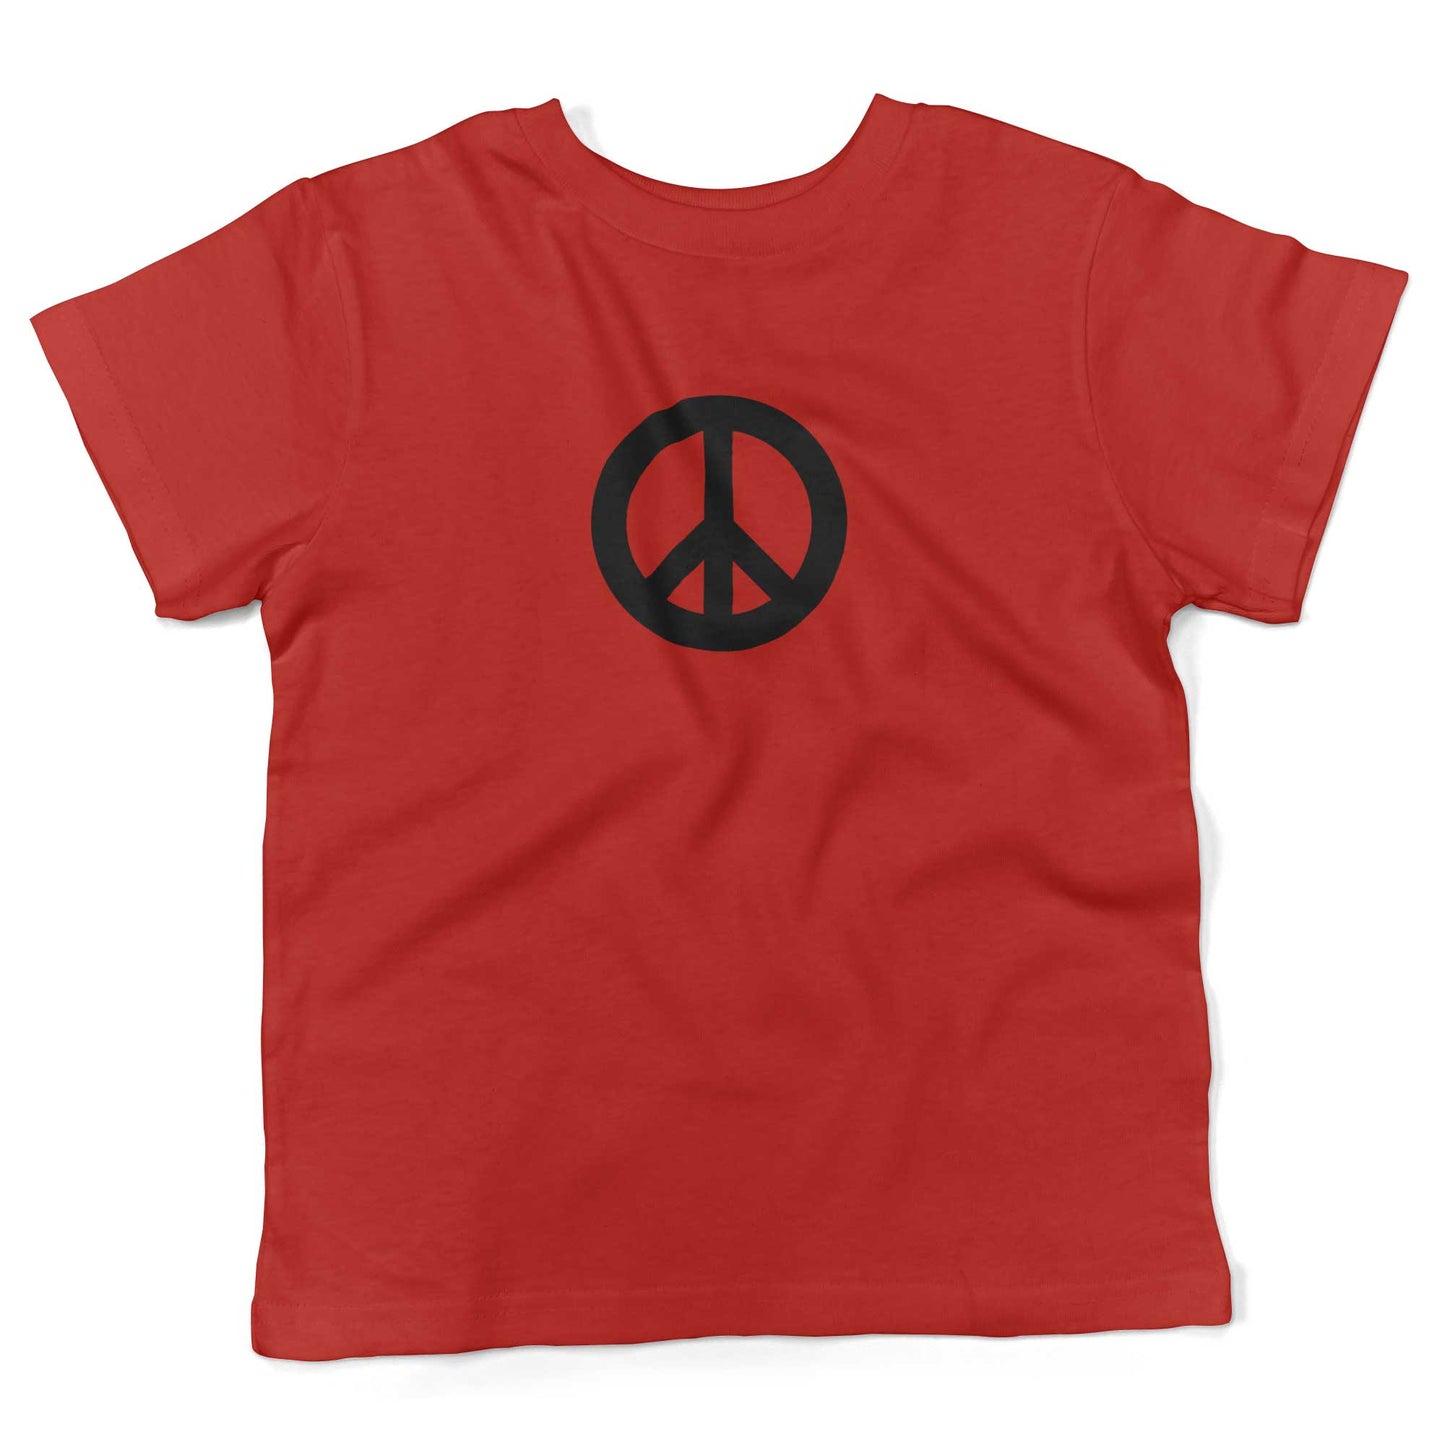 Peace Sign Toddler Shirt-Red-2T